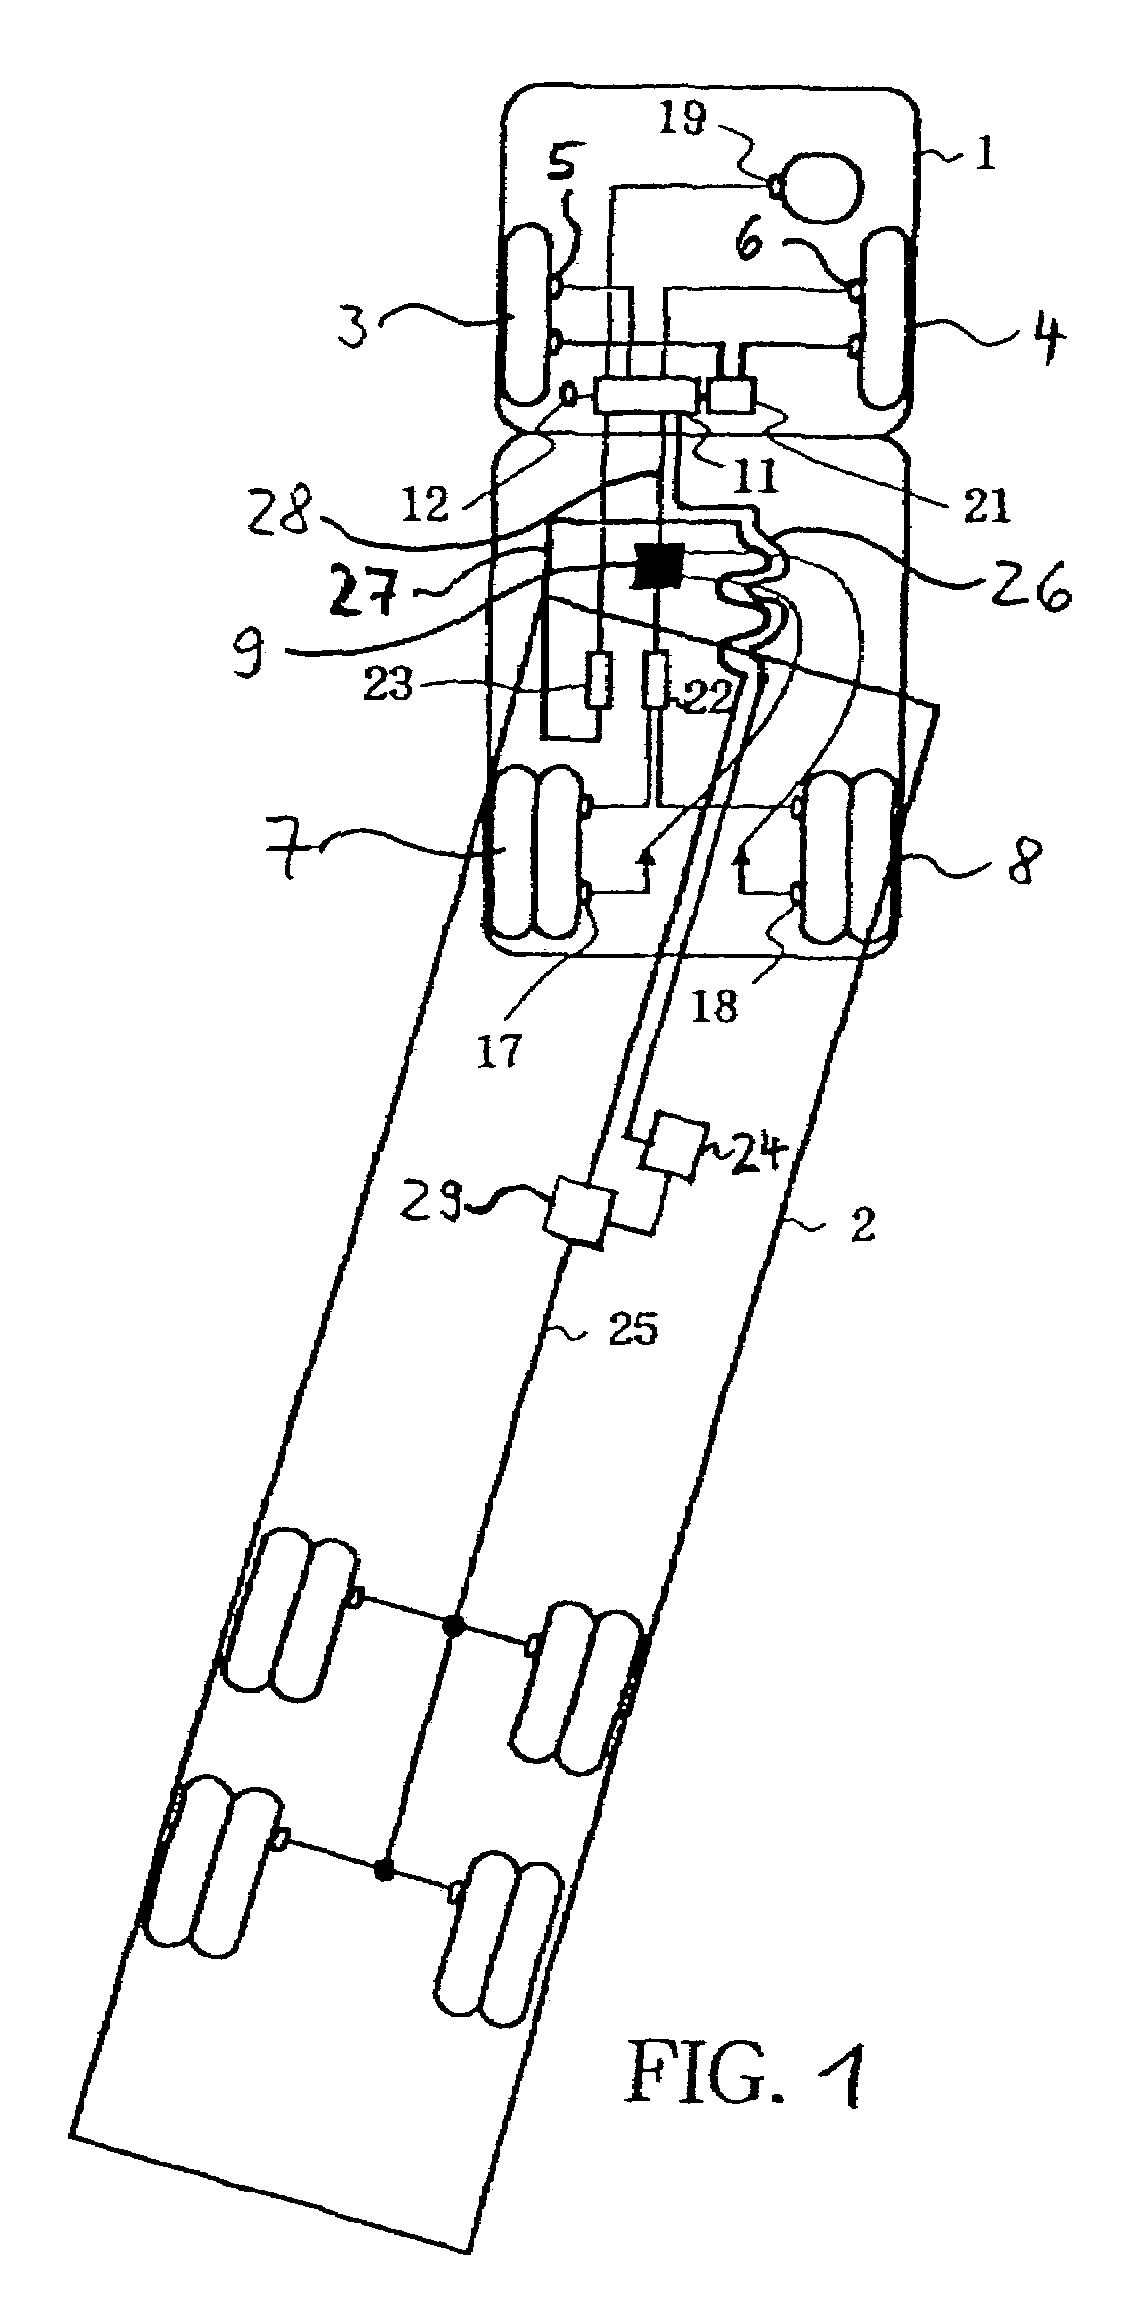 Method for controlling the brake system of a vehicle train